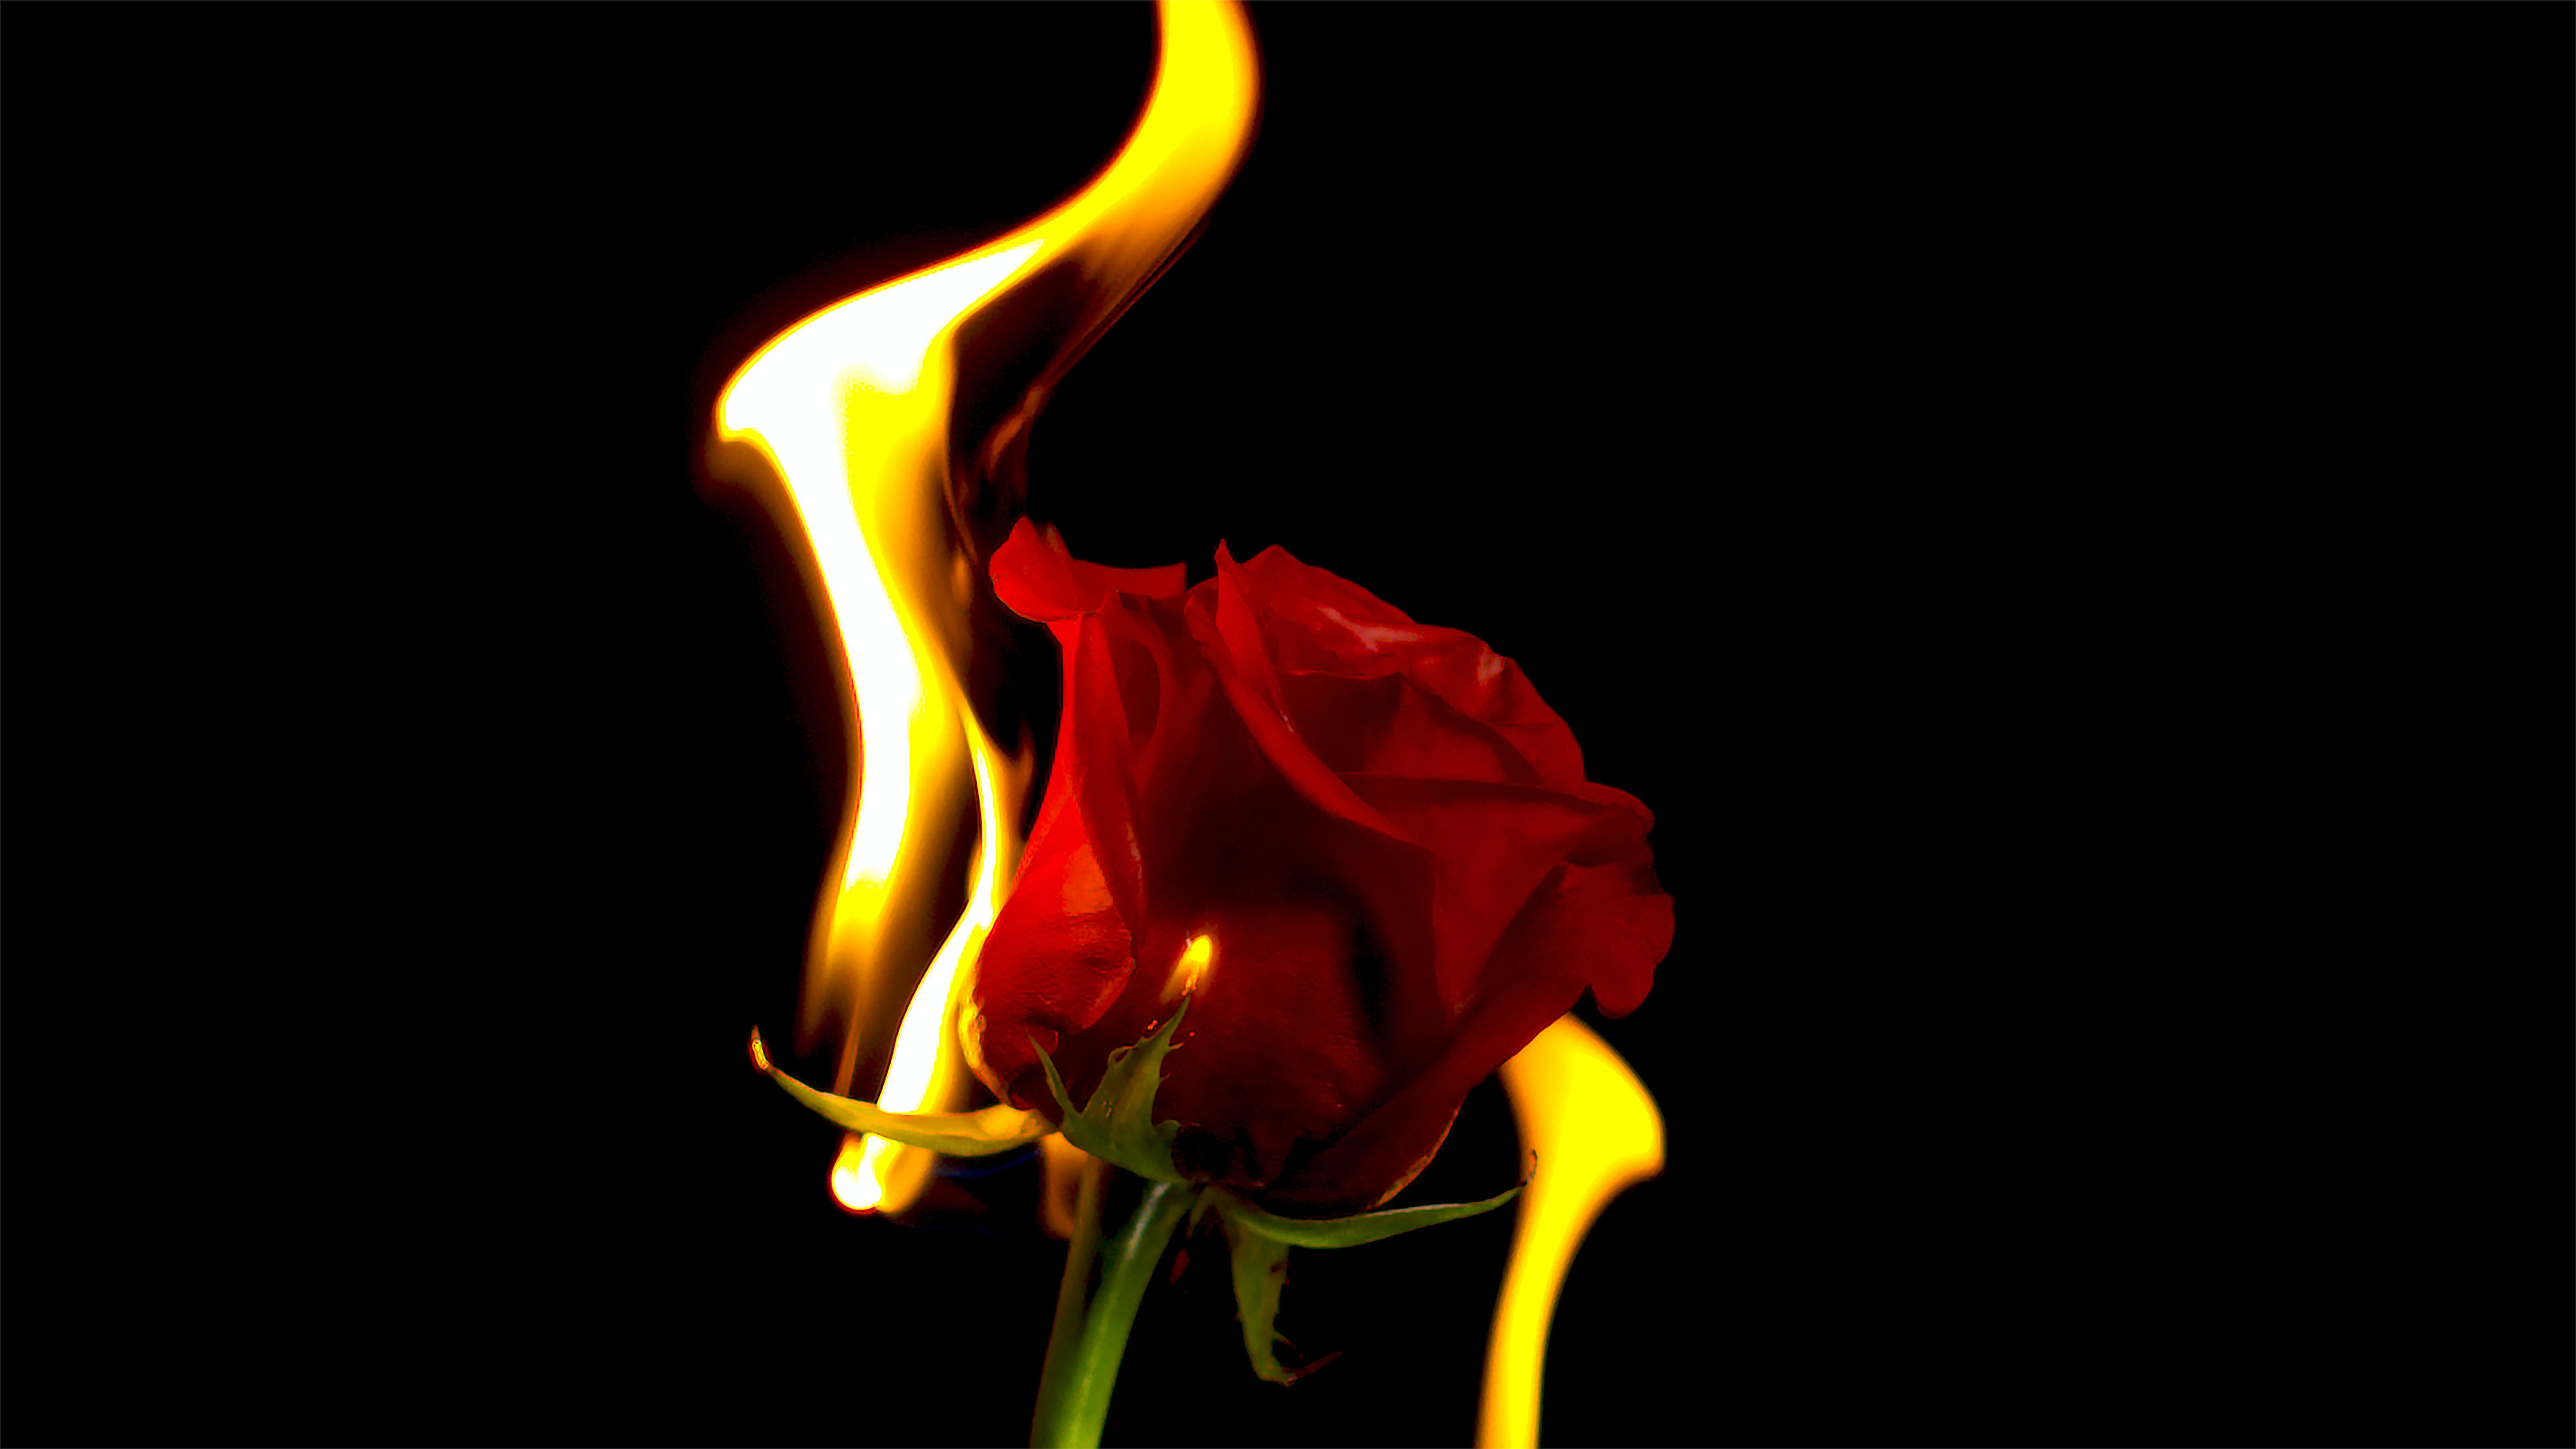 Fire Rose Wallpapers - Wallpaper Cave